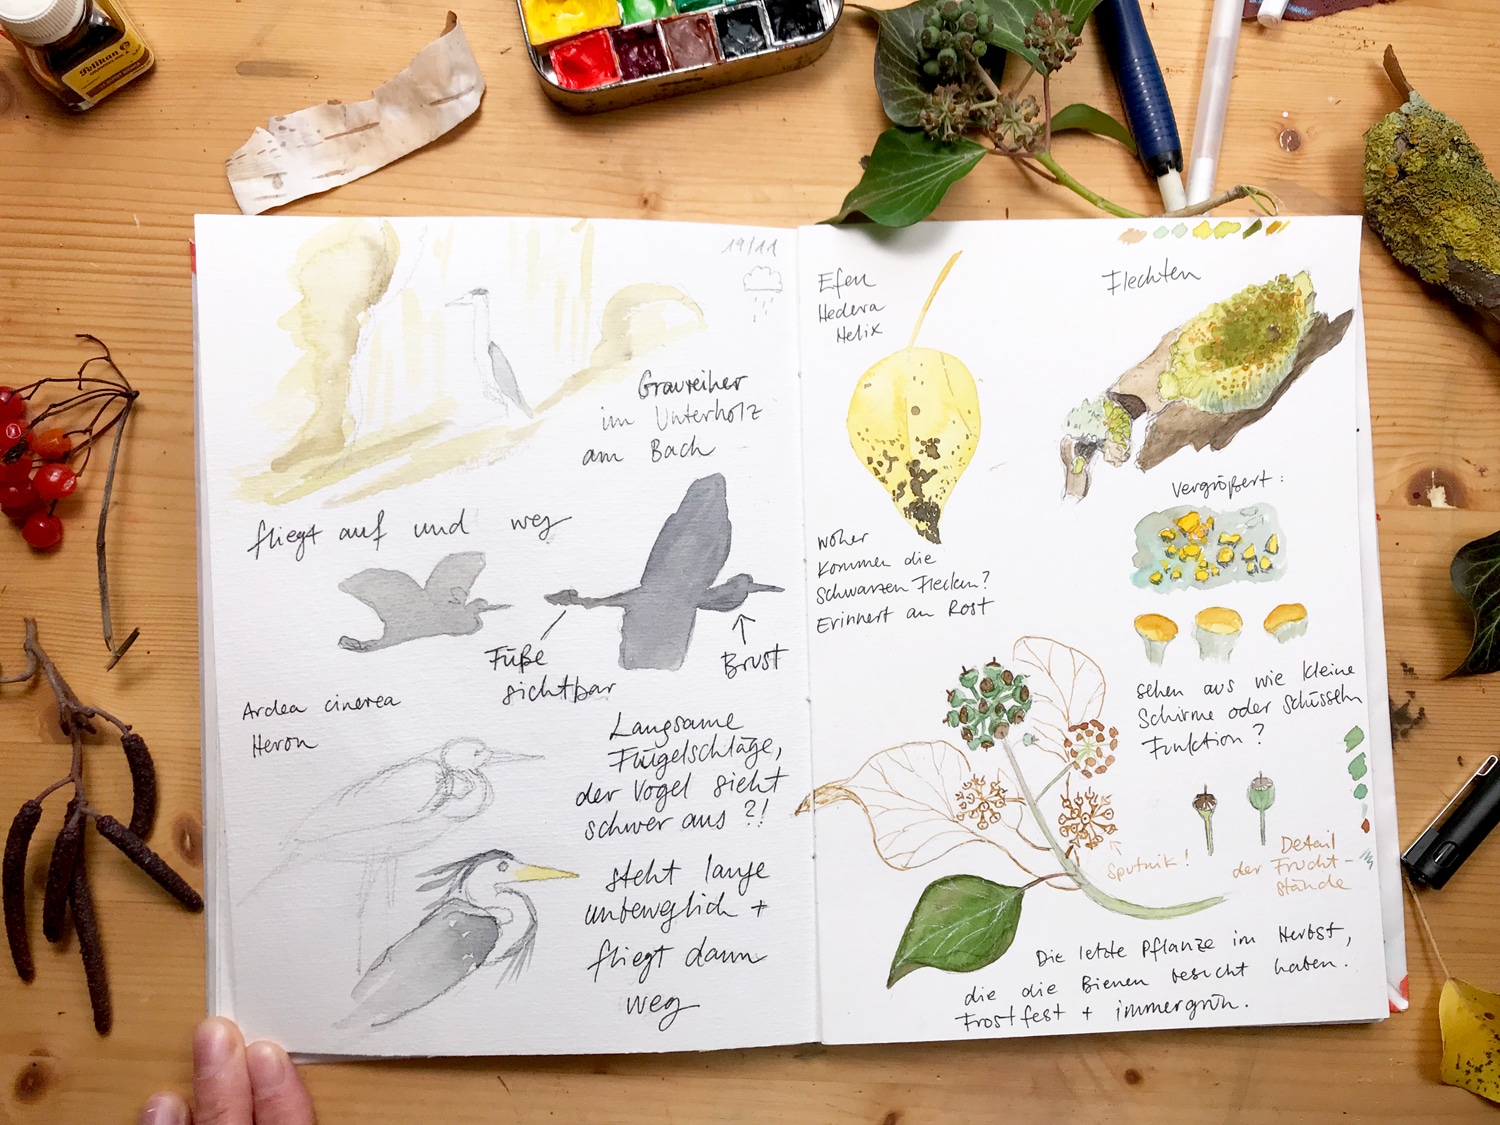 How To Start A Nature Journal - Sketchbook Techniques For Nature - New  Class